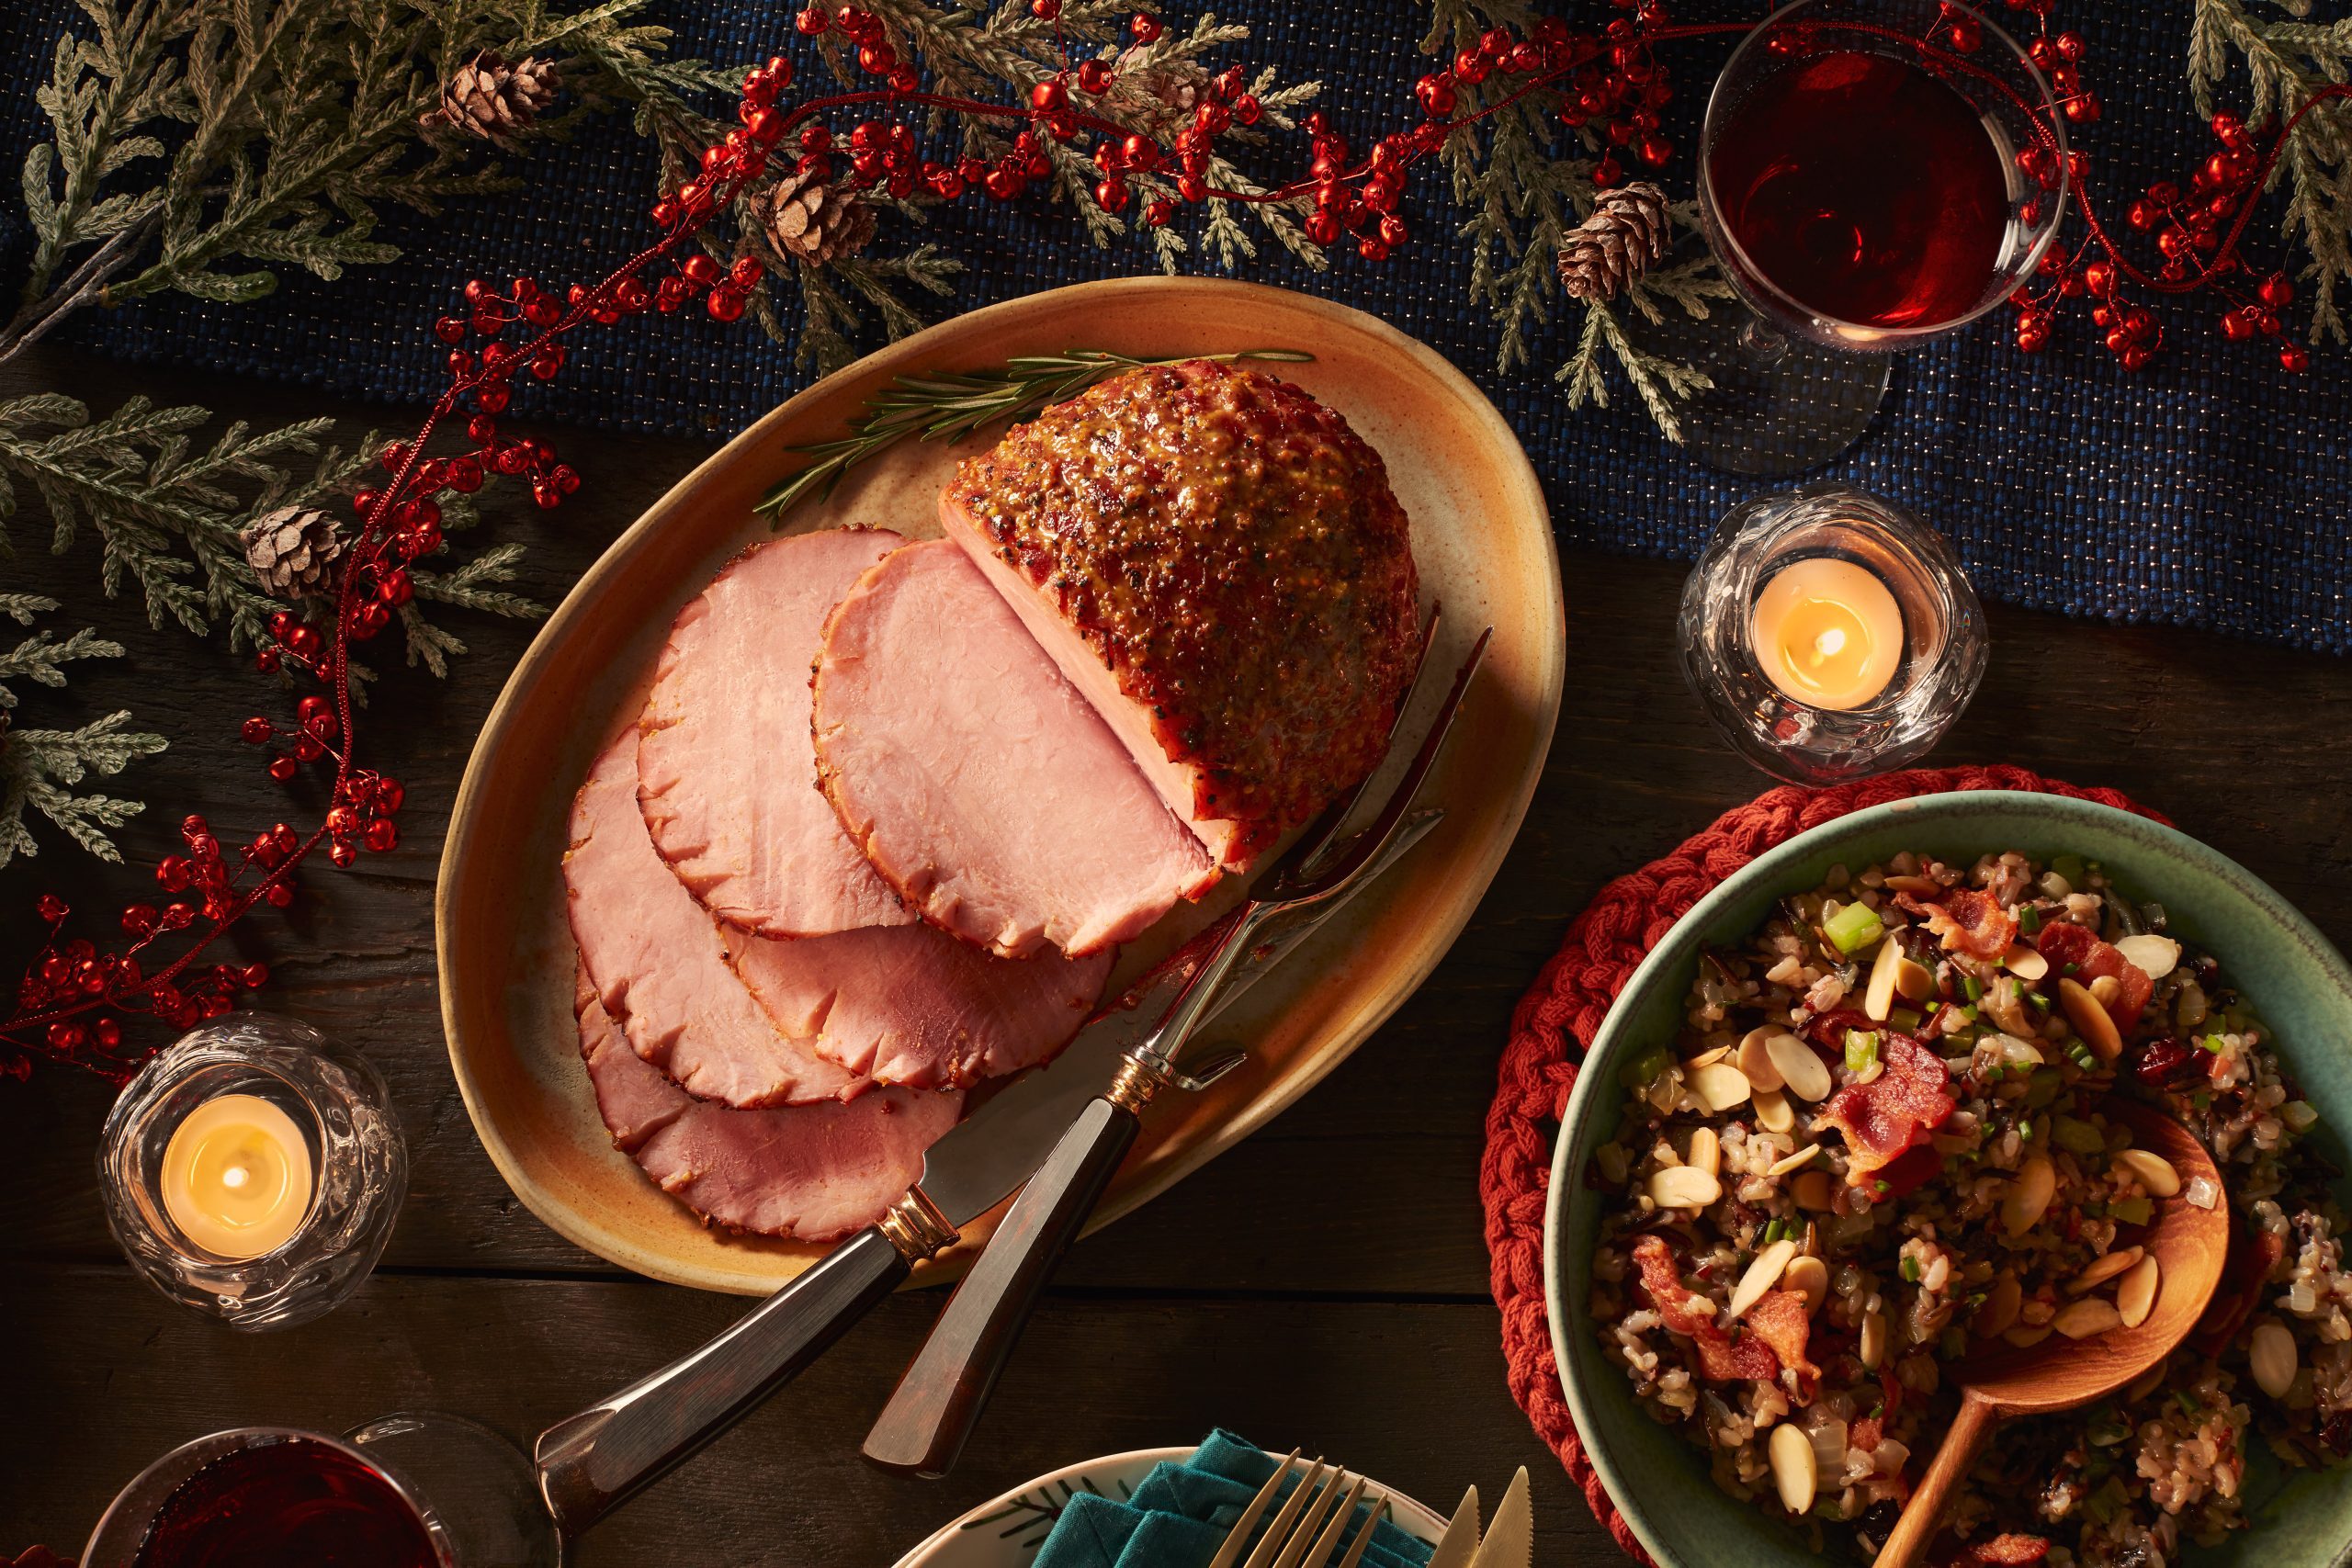 Spiced Mustard-Glazed Ham with Wild Rice and Almond Stuffing Bake